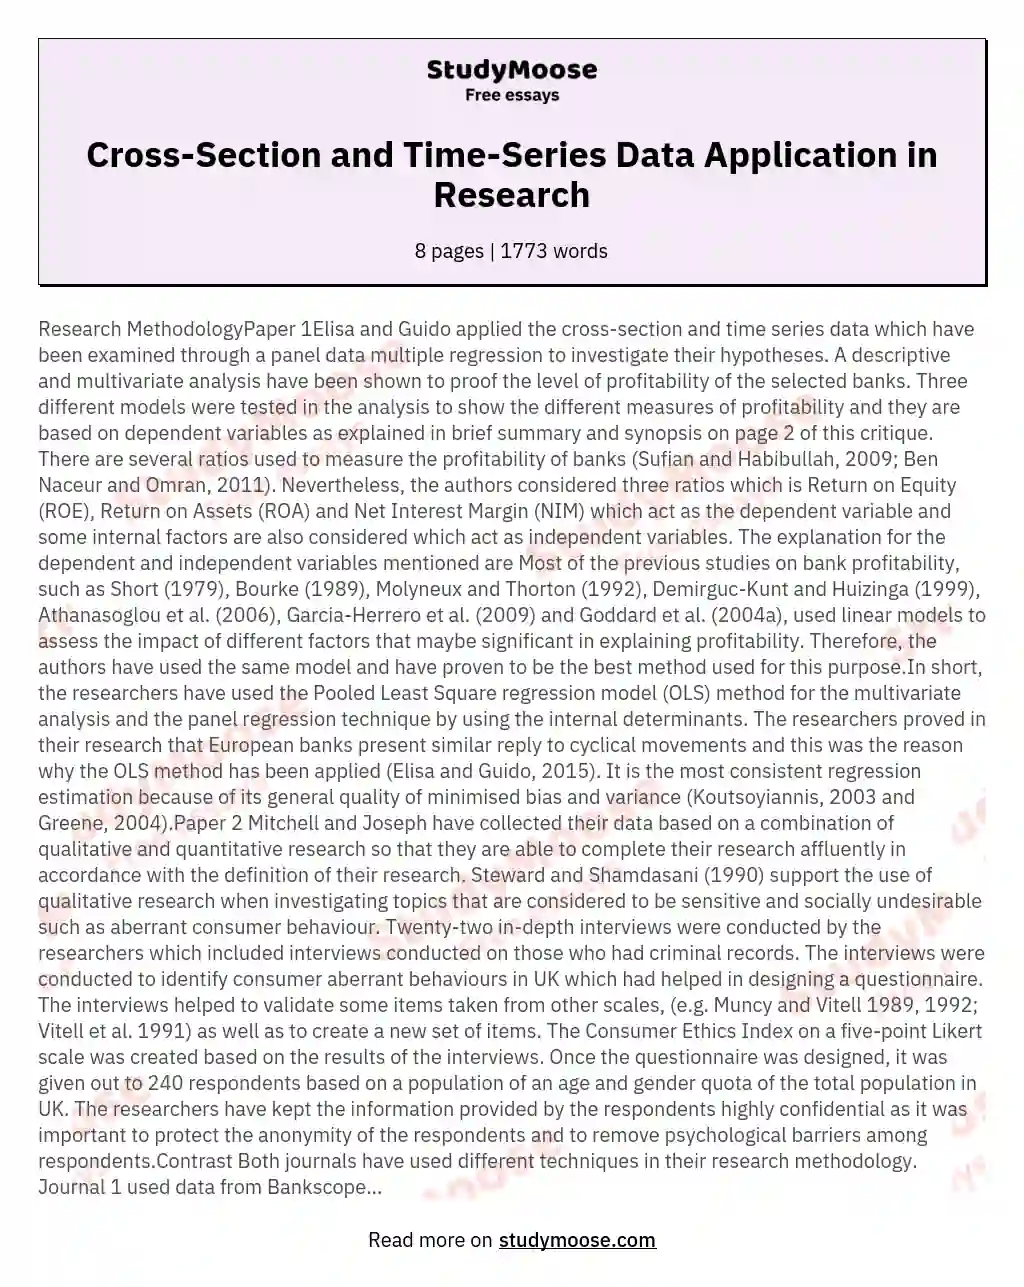 Cross-Section and Time-Series Data Application in Research essay